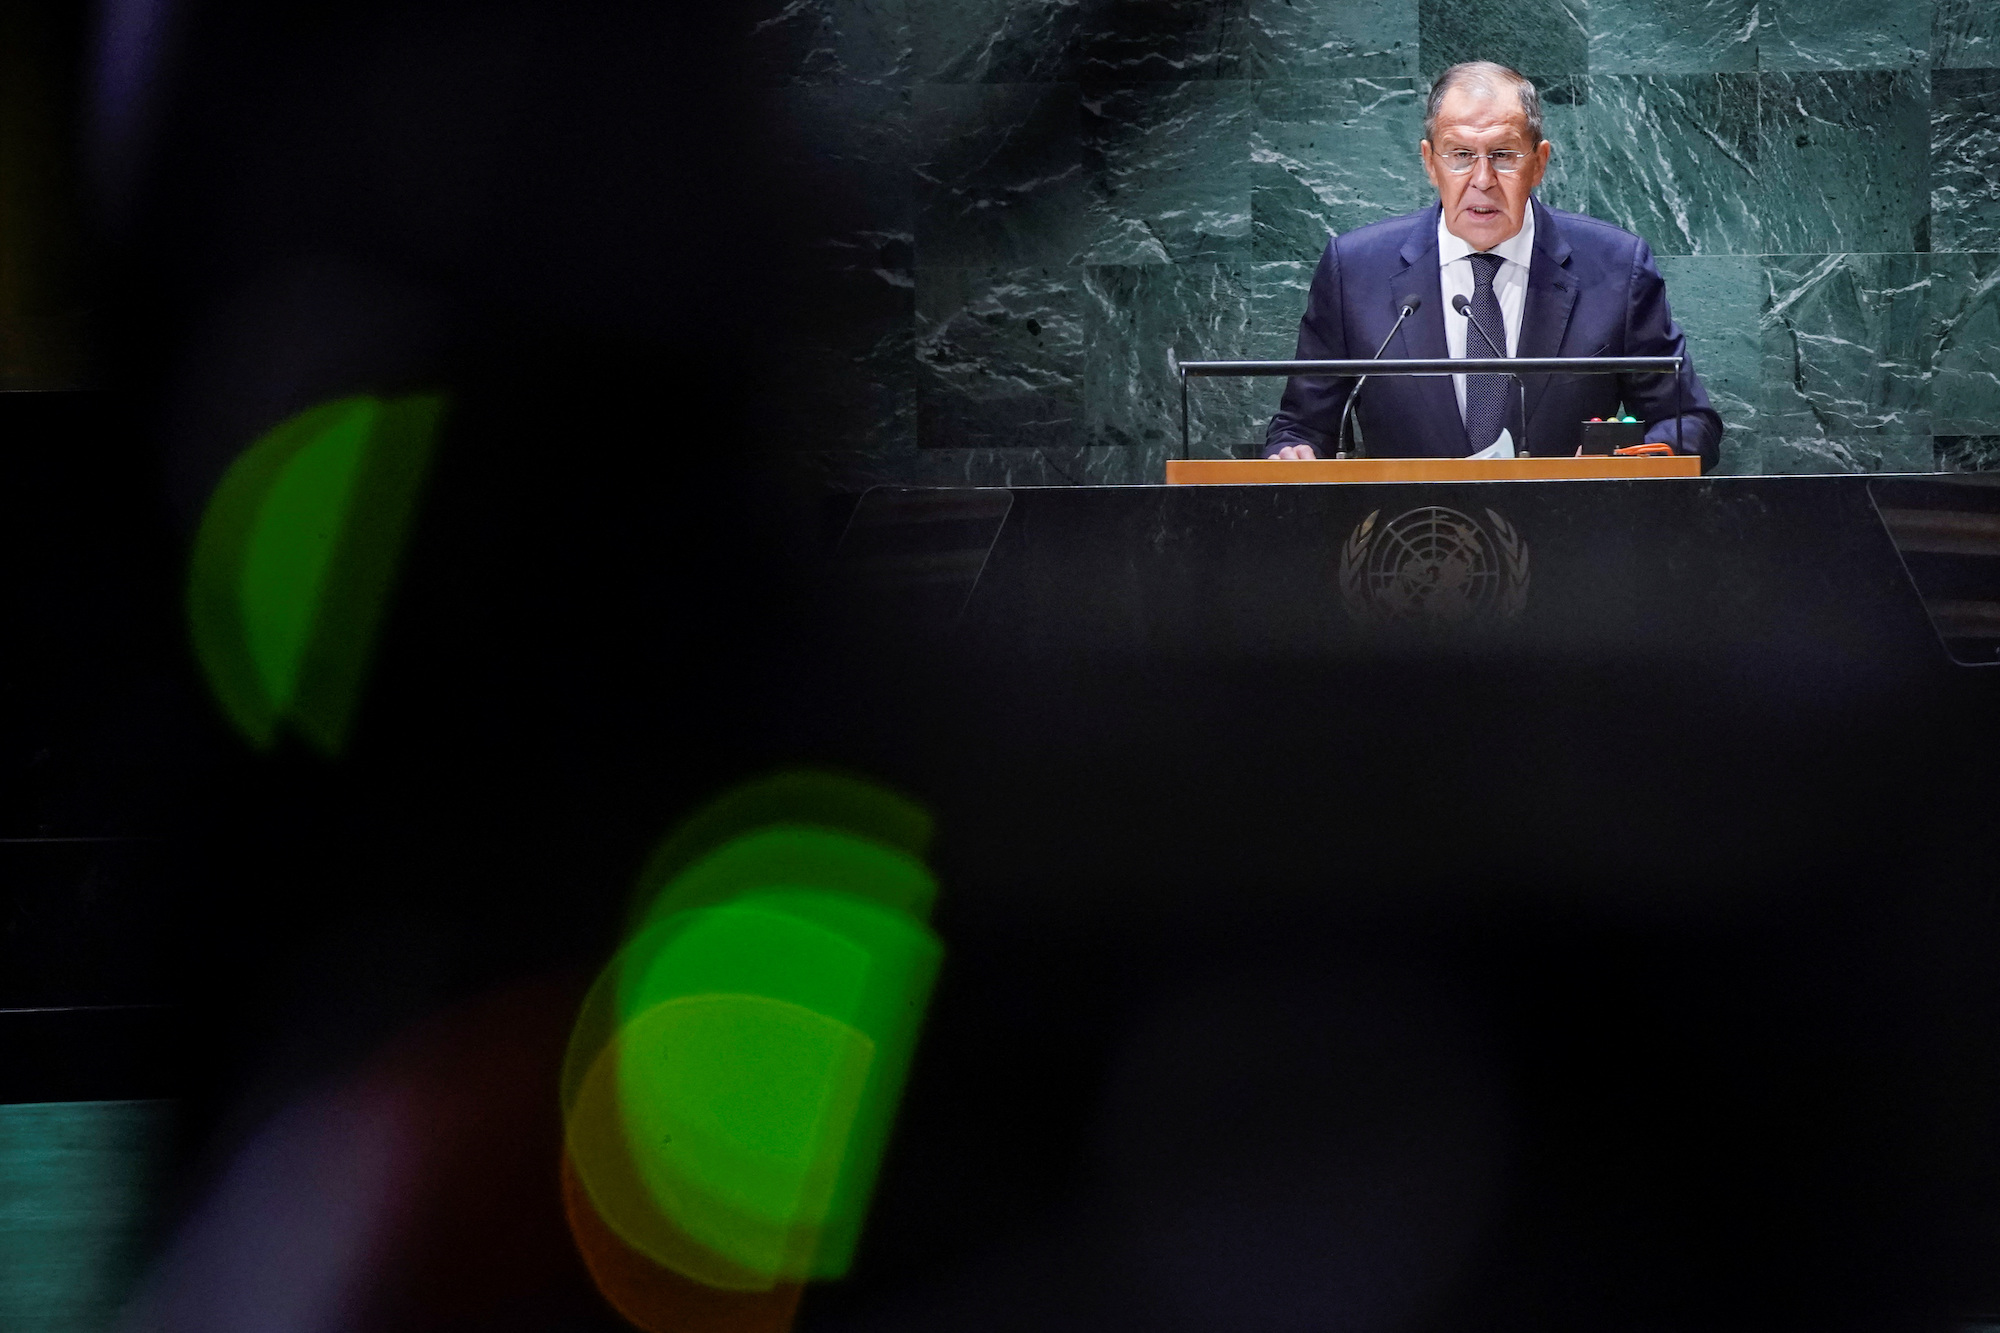 Russia's Foreign Minister Sergei Lavrov addresses the UN General Assembly in New York City on Saturday.